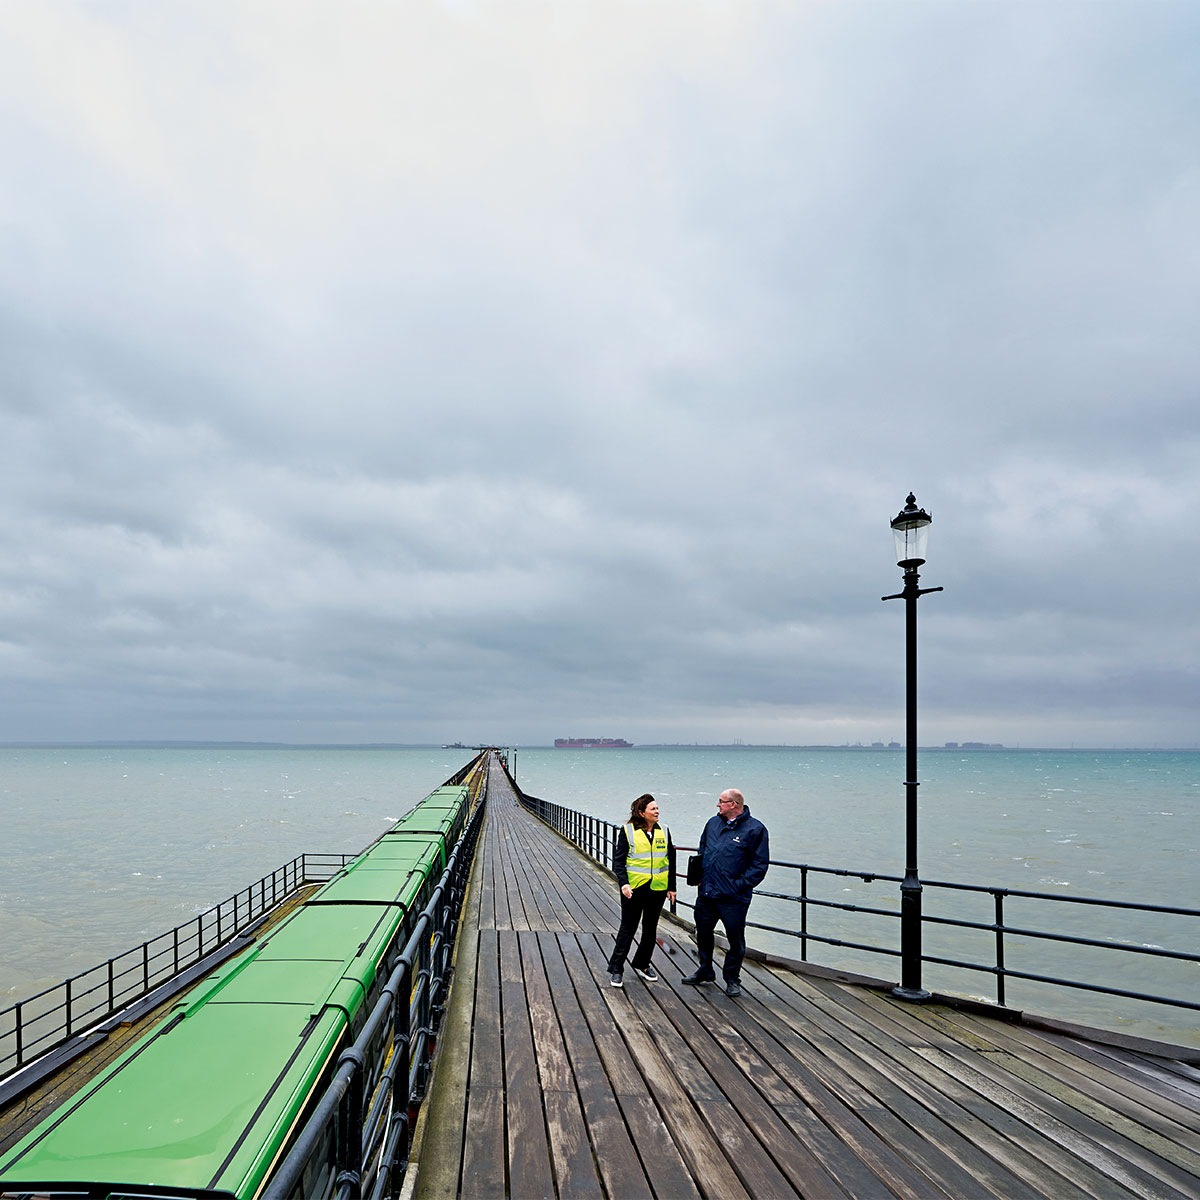 Two people standing on a pier